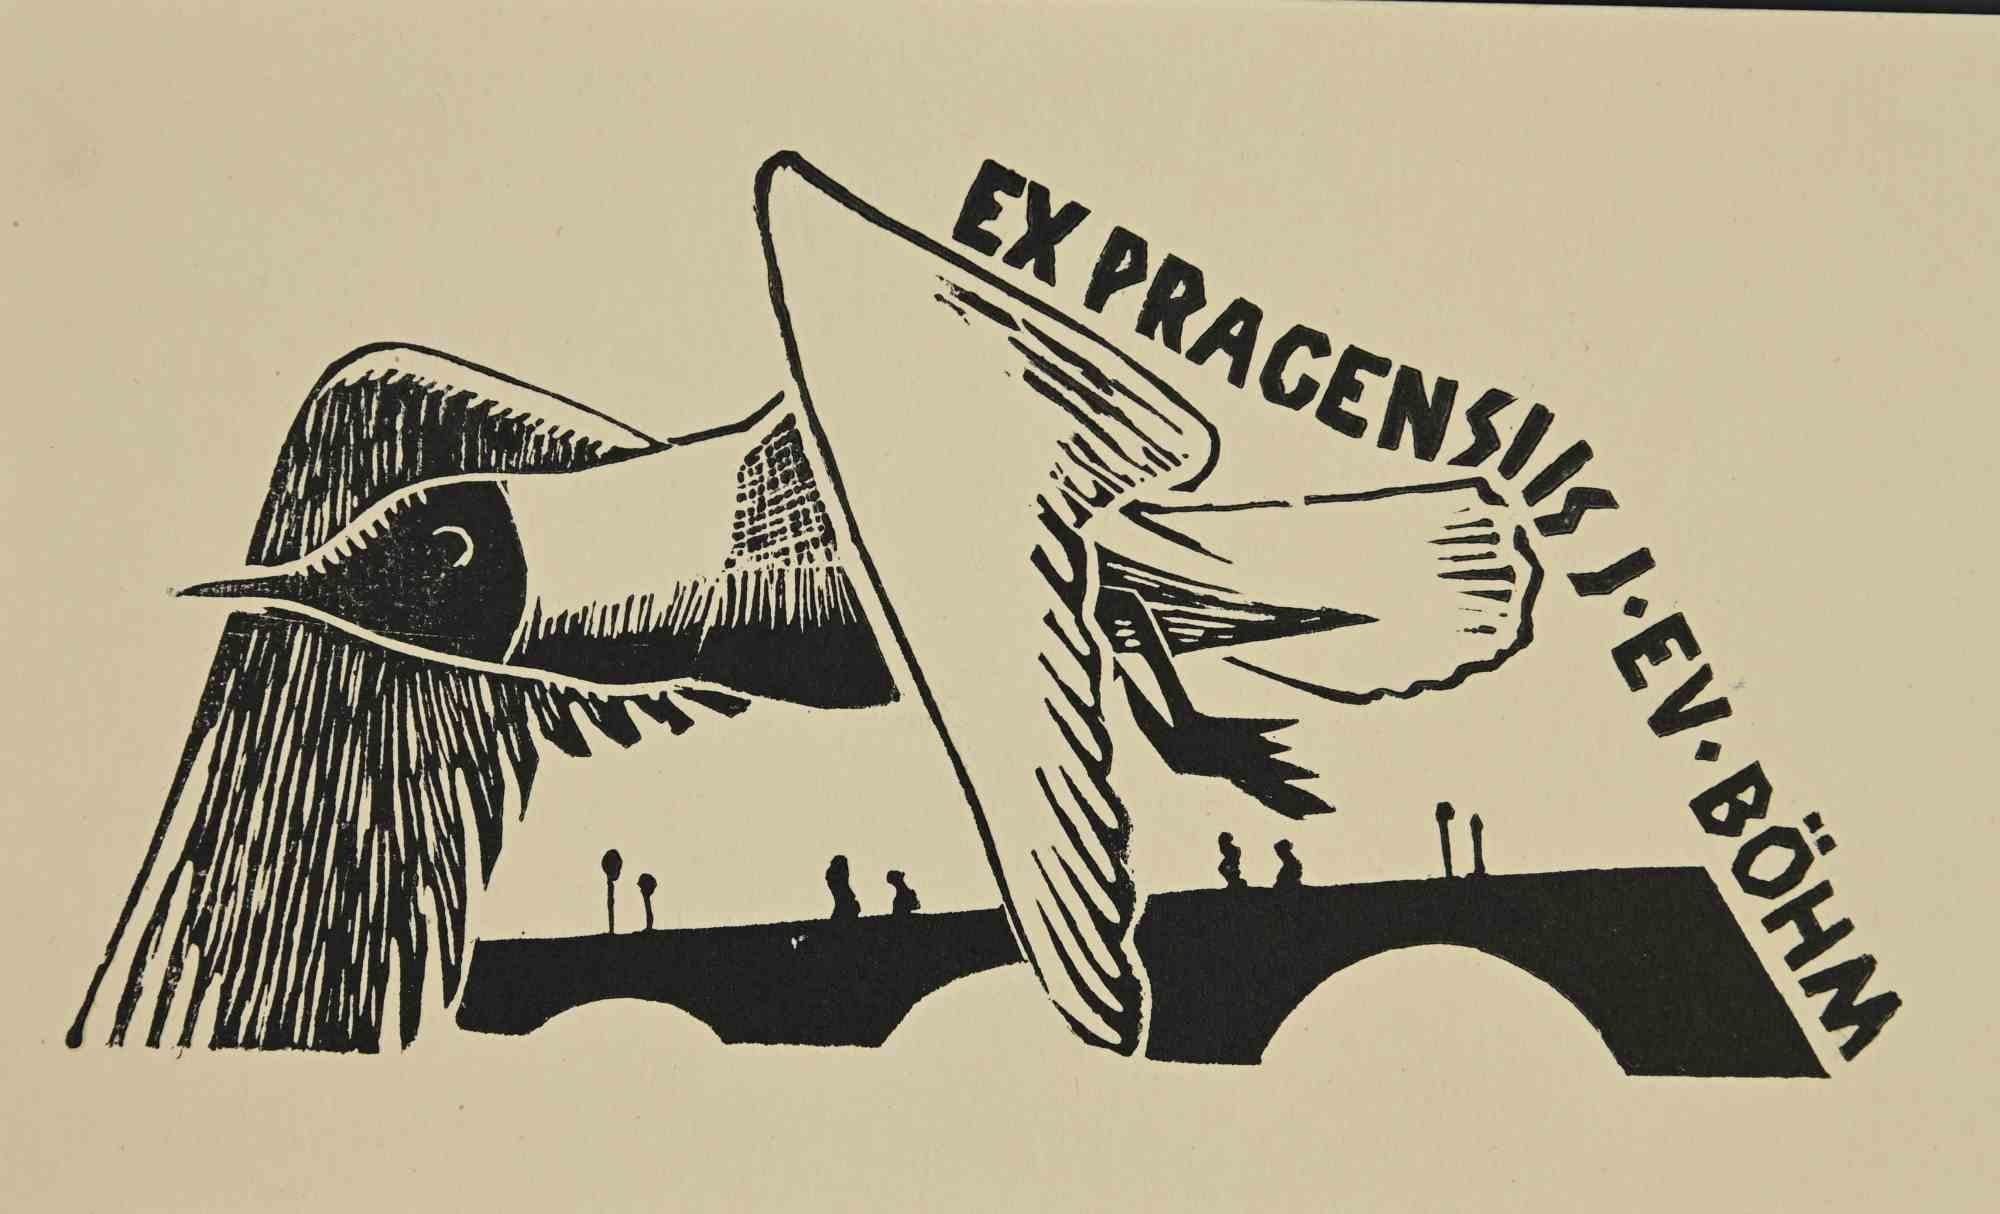 Ex libris - Pragensiis J - Ev - Böhm is an Artwork realized in 1963,  by the Artist J .Ev . Böhm. 

Woodcut print on ivory paper. 

Good conditions.

The artwork represents a minimalistic, clean design, through preciseness and congruous B./W. colors.